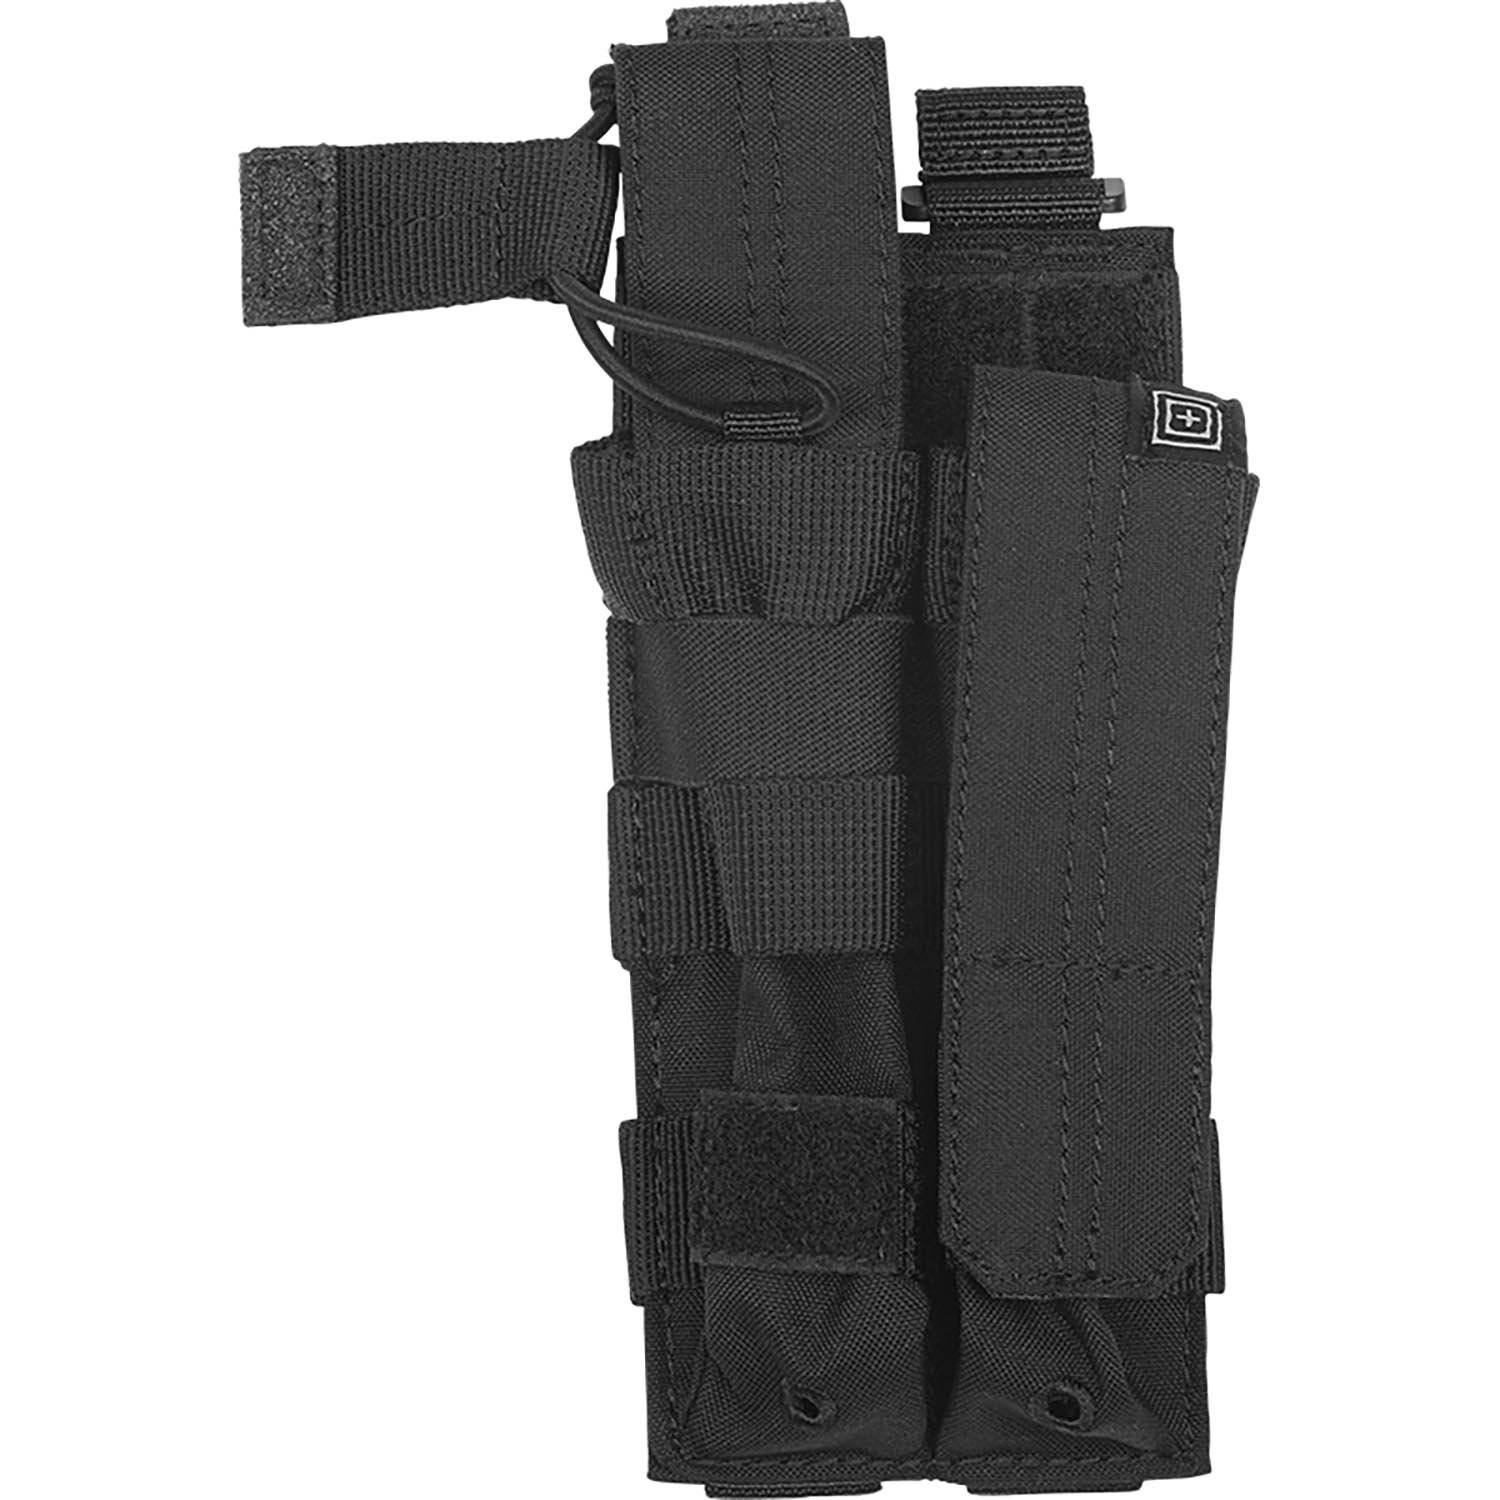 5.11 TACTICAL DOUBLE MP5 BUNGEE COVER